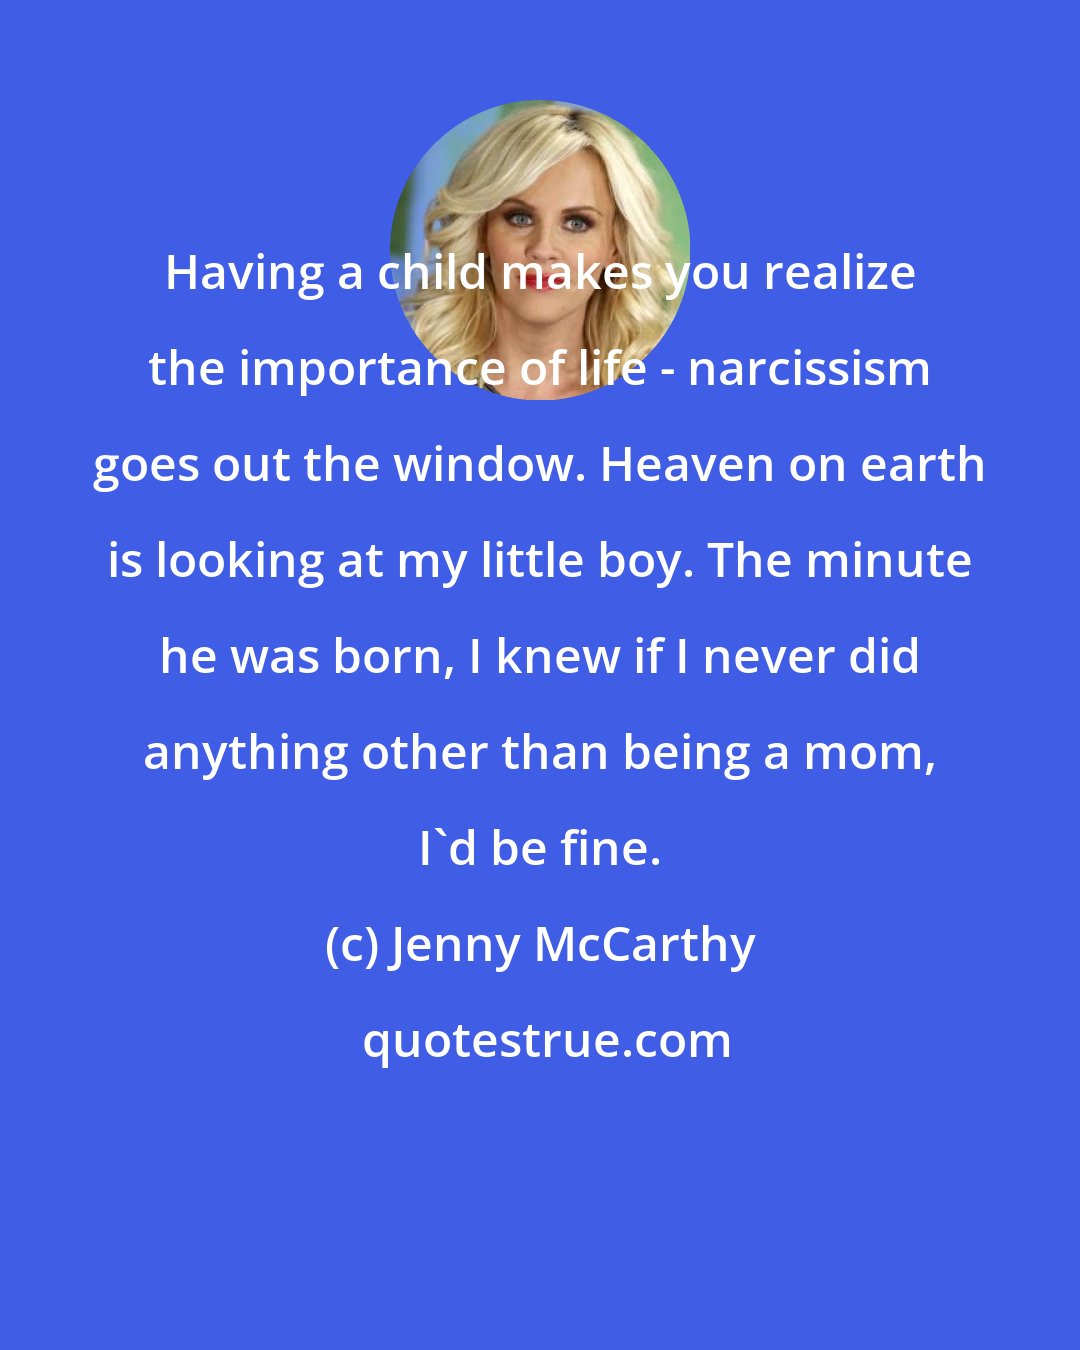 Jenny McCarthy: Having a child makes you realize the importance of life - narcissism goes out the window. Heaven on earth is looking at my little boy. The minute he was born, I knew if I never did anything other than being a mom, I'd be fine.